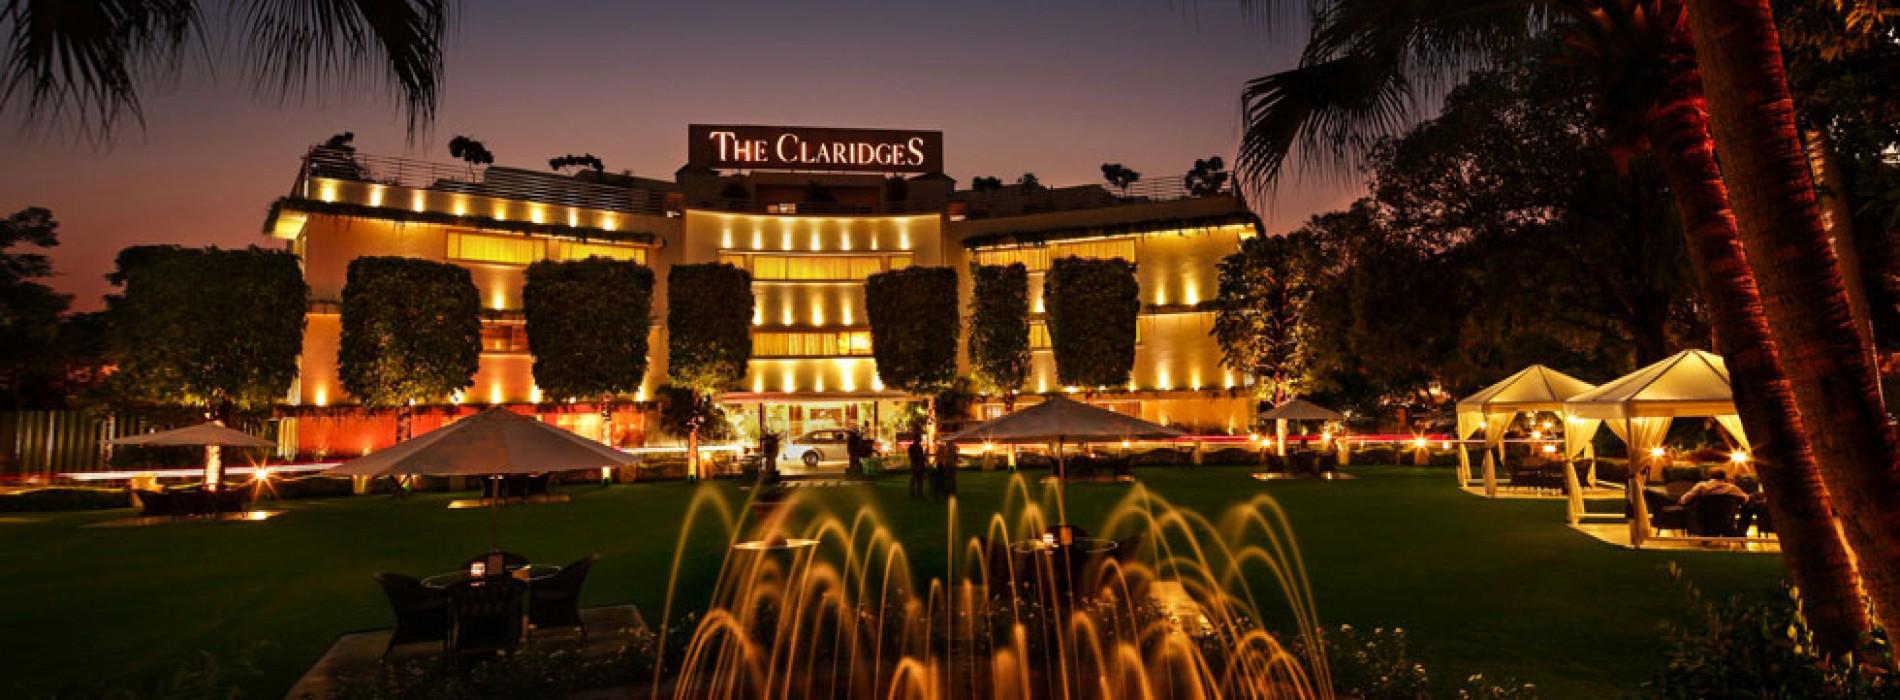 The Claridges, New Delhi: a happening place of modern luxury